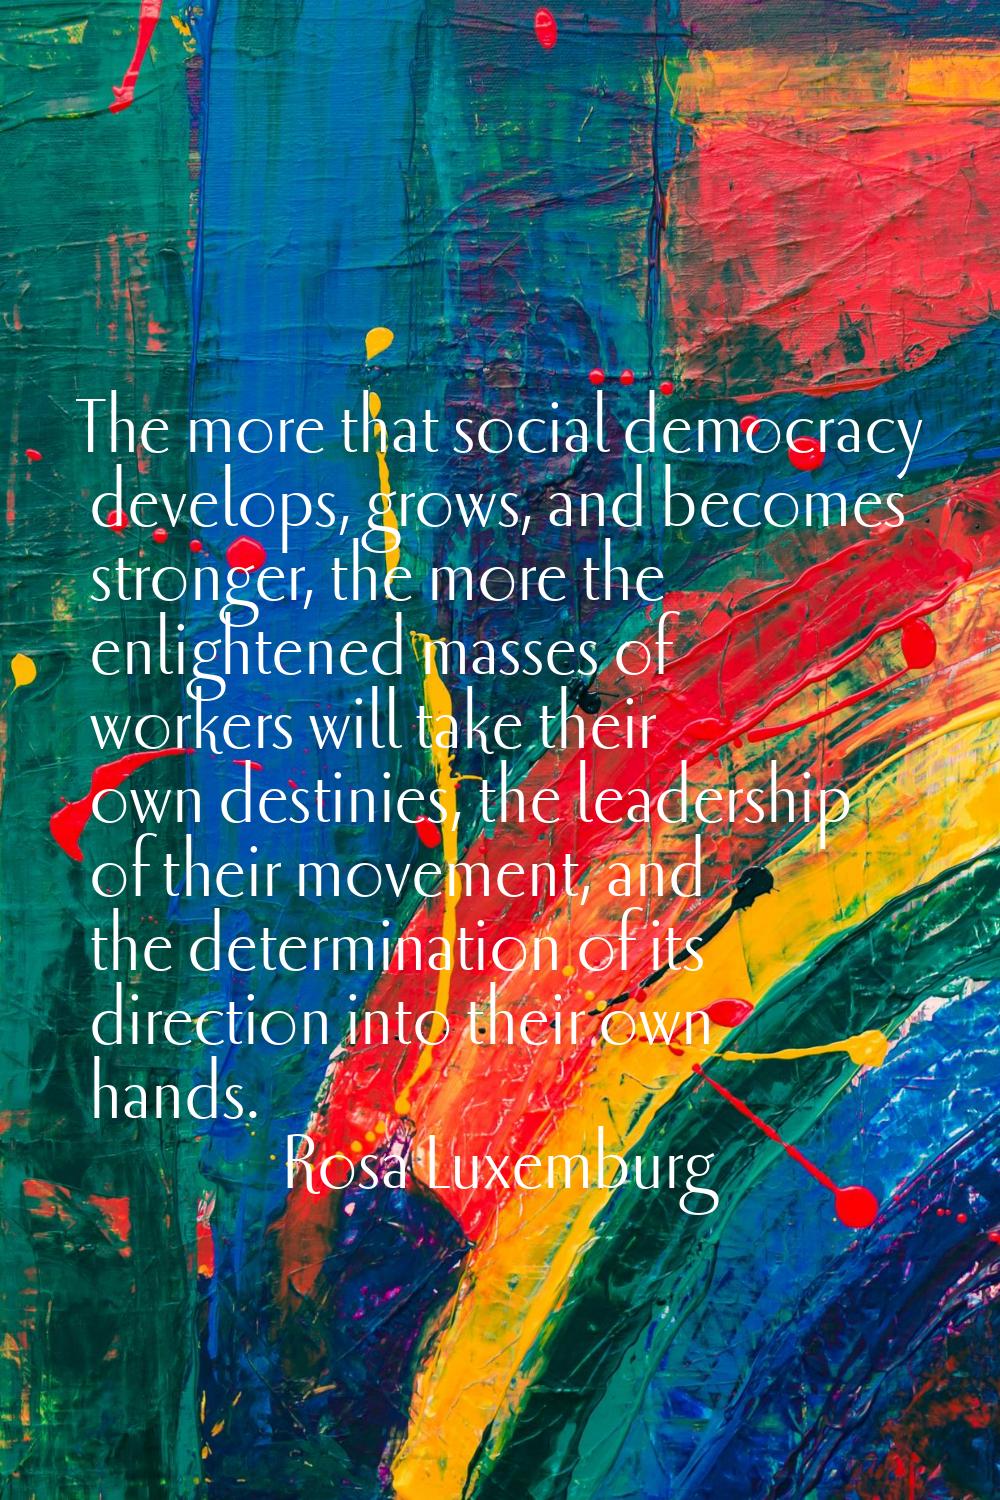 The more that social democracy develops, grows, and becomes stronger, the more the enlightened mass